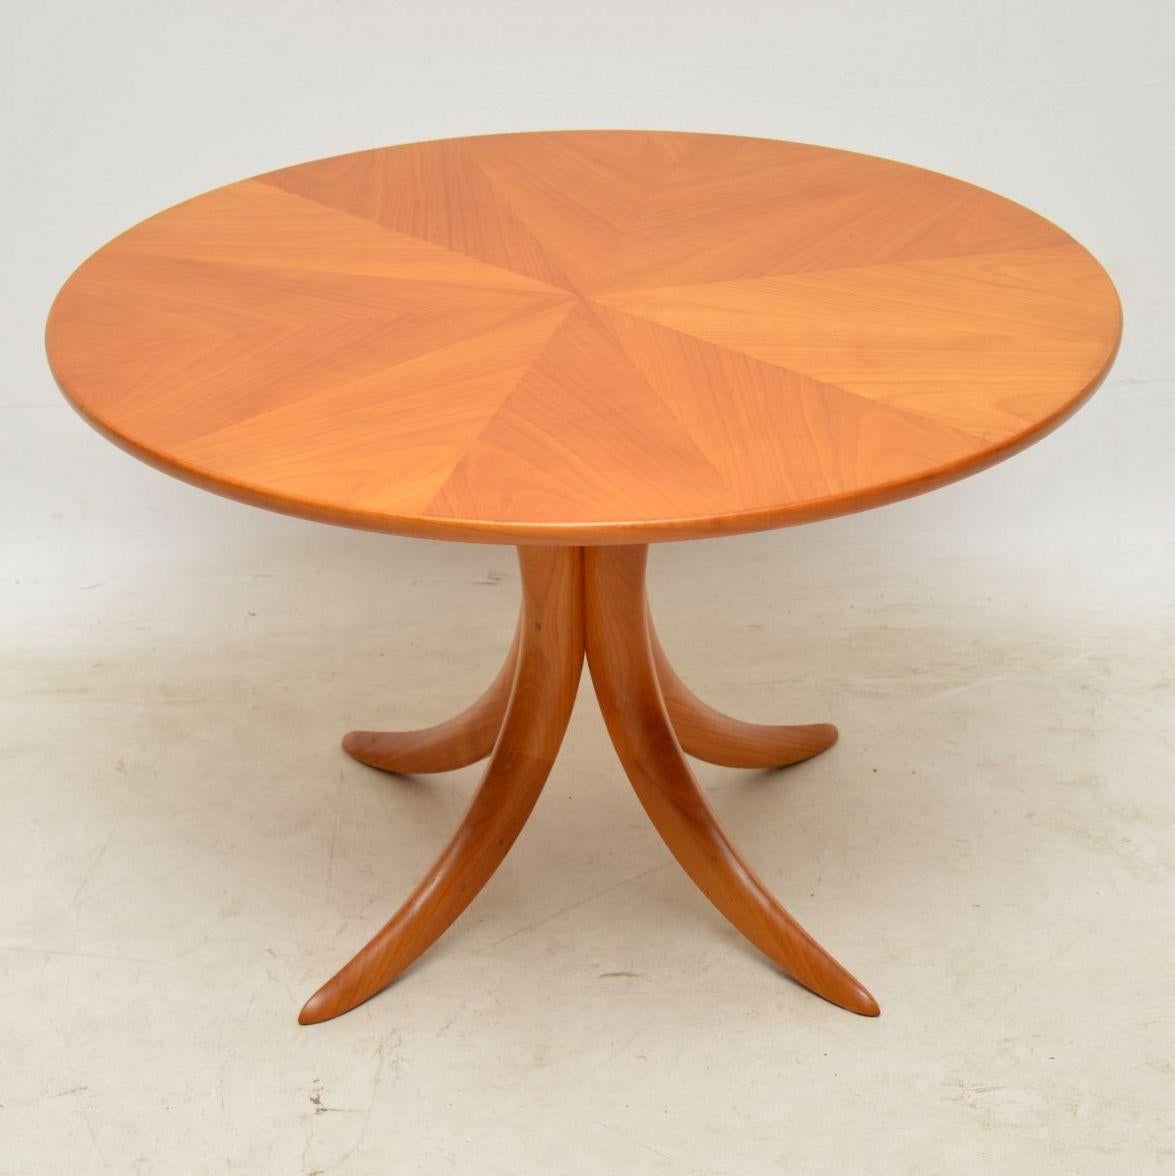 A beautiful vintage coffee table of stunning quality, this was made in Germany by Alma, it dates from the 1960s. It has wonderfully shaped sabre legs in solid teak, the top looks like elm or ashwood. It’s in great vintage condition, there are just a